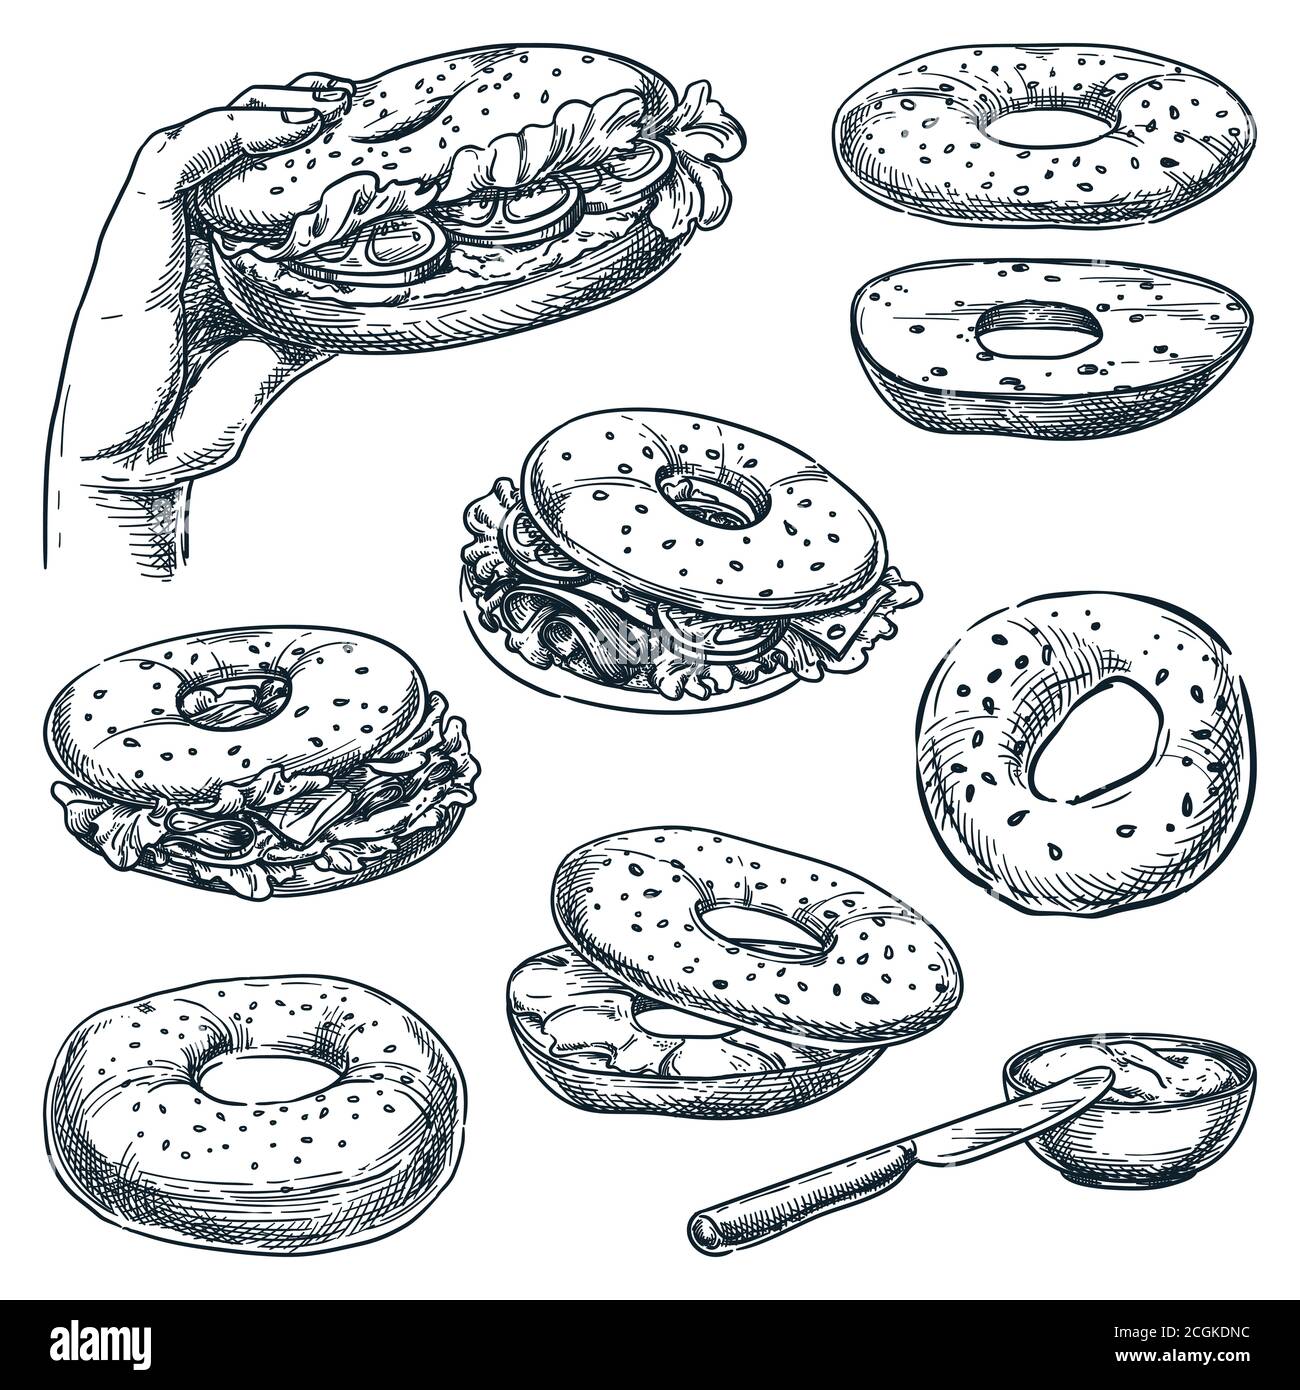 Bagel bread and sandwiches set, isolated on white background. Fast food snacks vector sketch illustration. Bun with salmon, cheese, ham and tomato. Ca Stock Vector